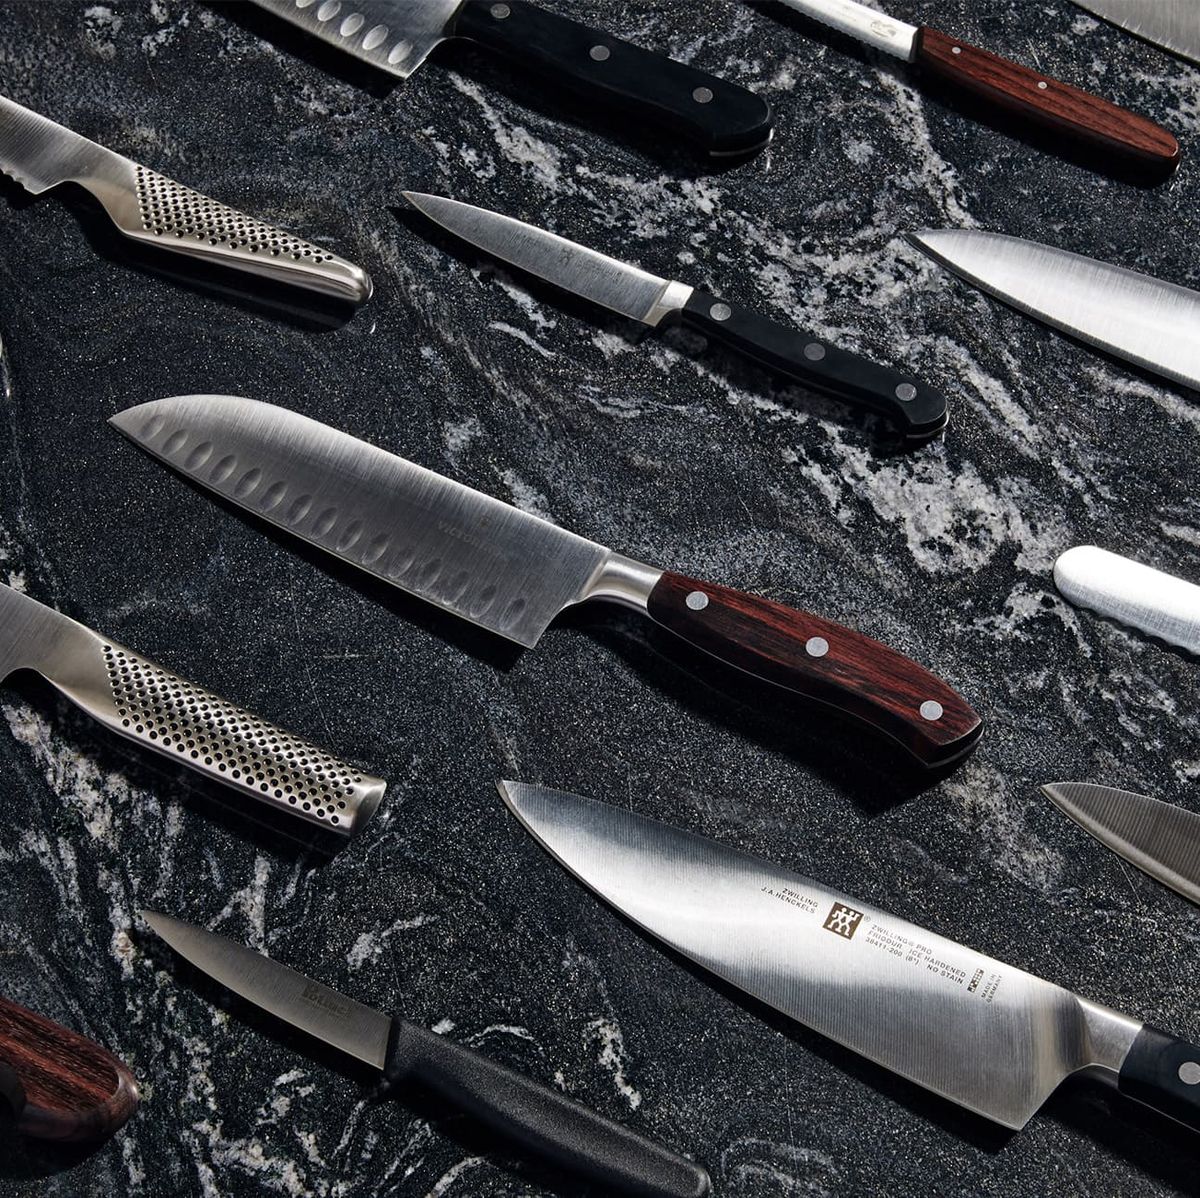 13 Best Kitchen Knives for Home Chefs of All Skills